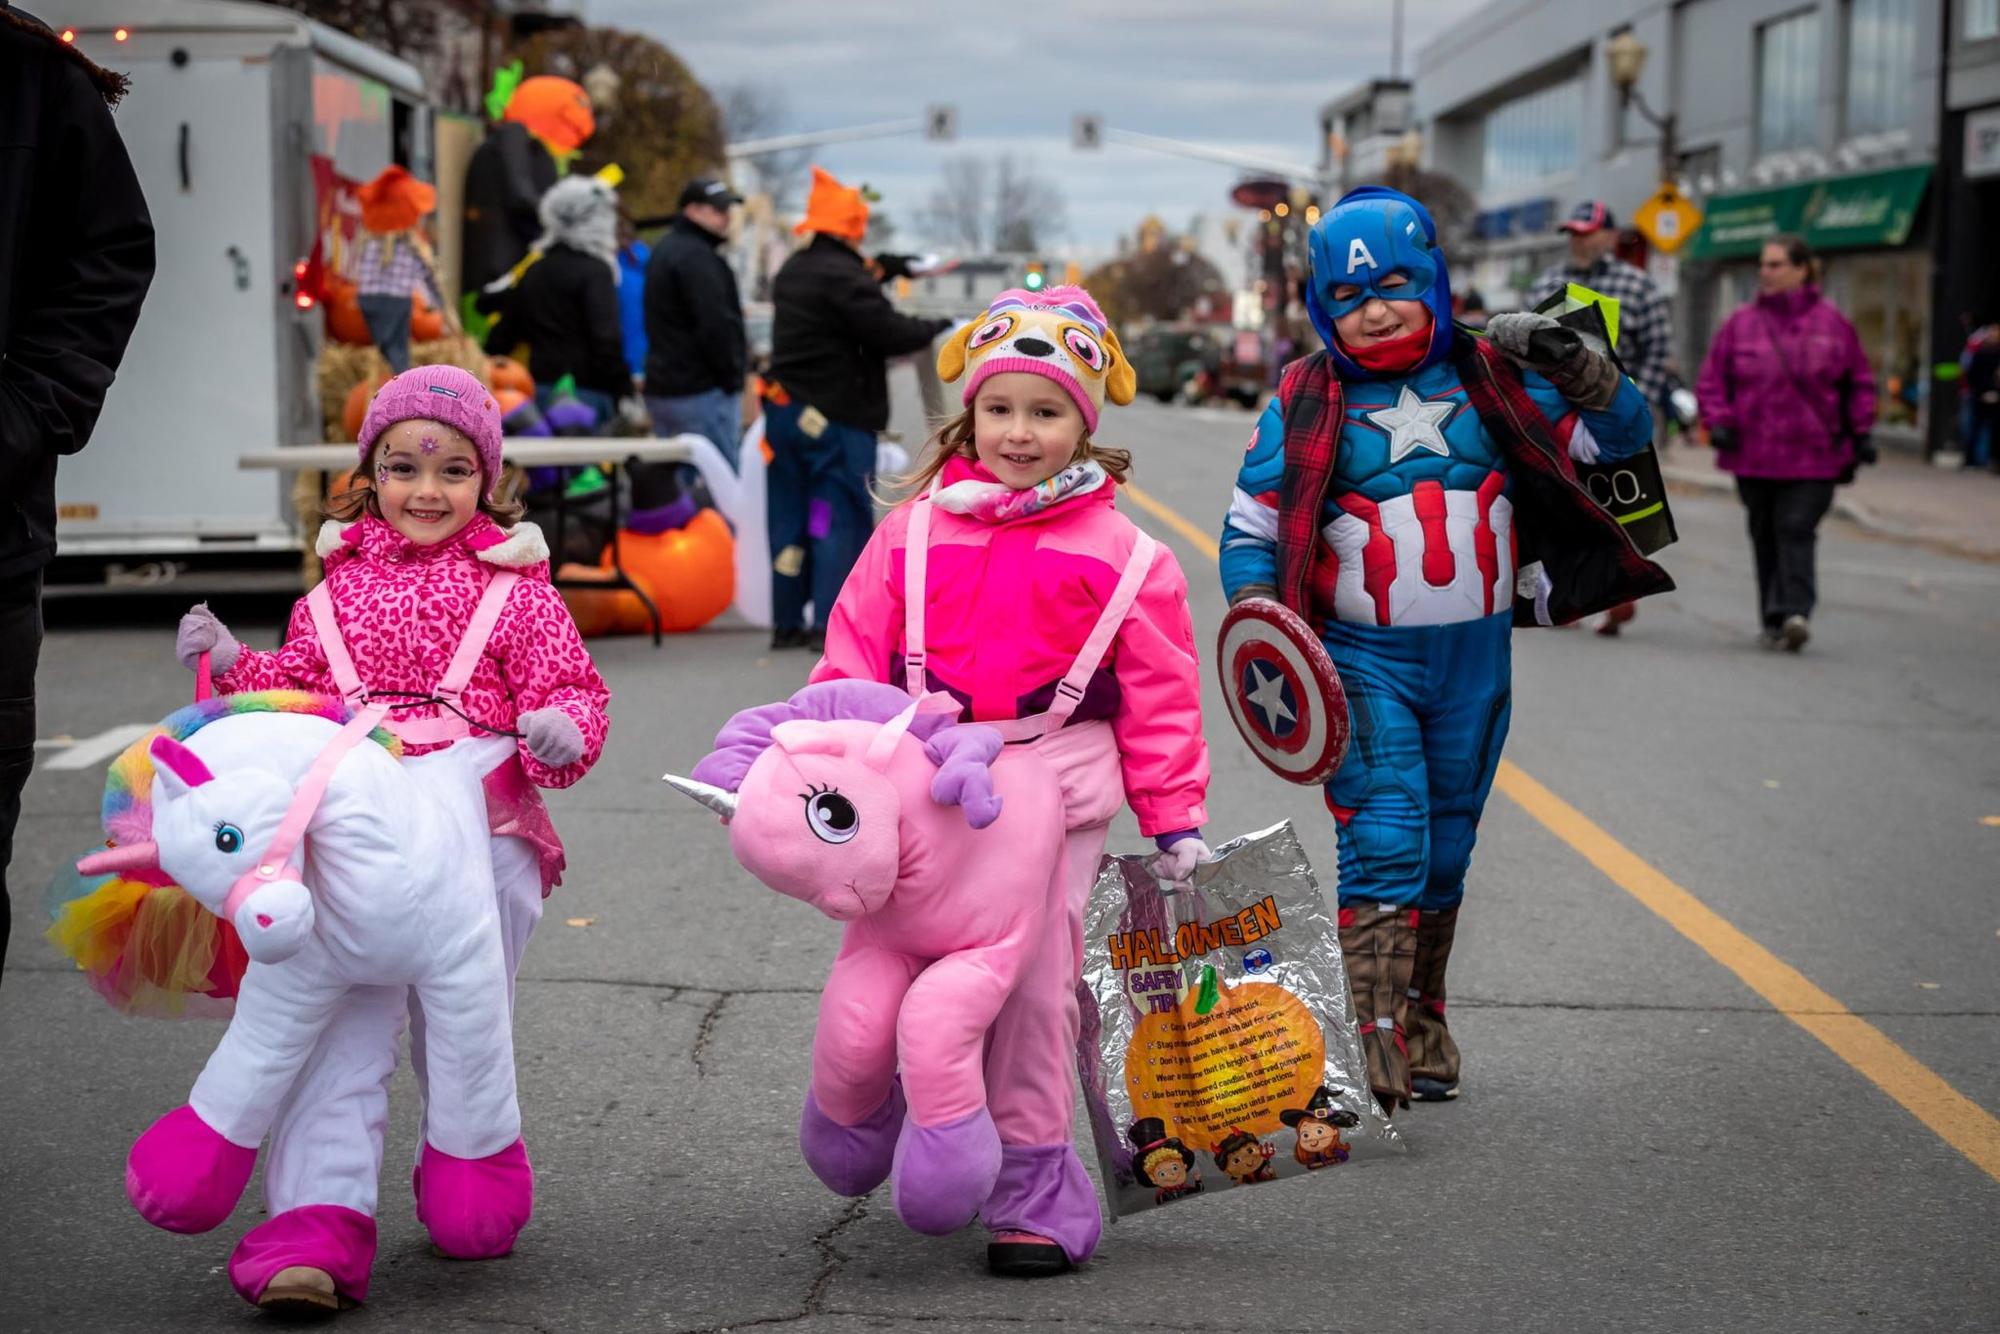 Hawkesbury’s Main Street welcomed 700 trick-or-treaters at annual event